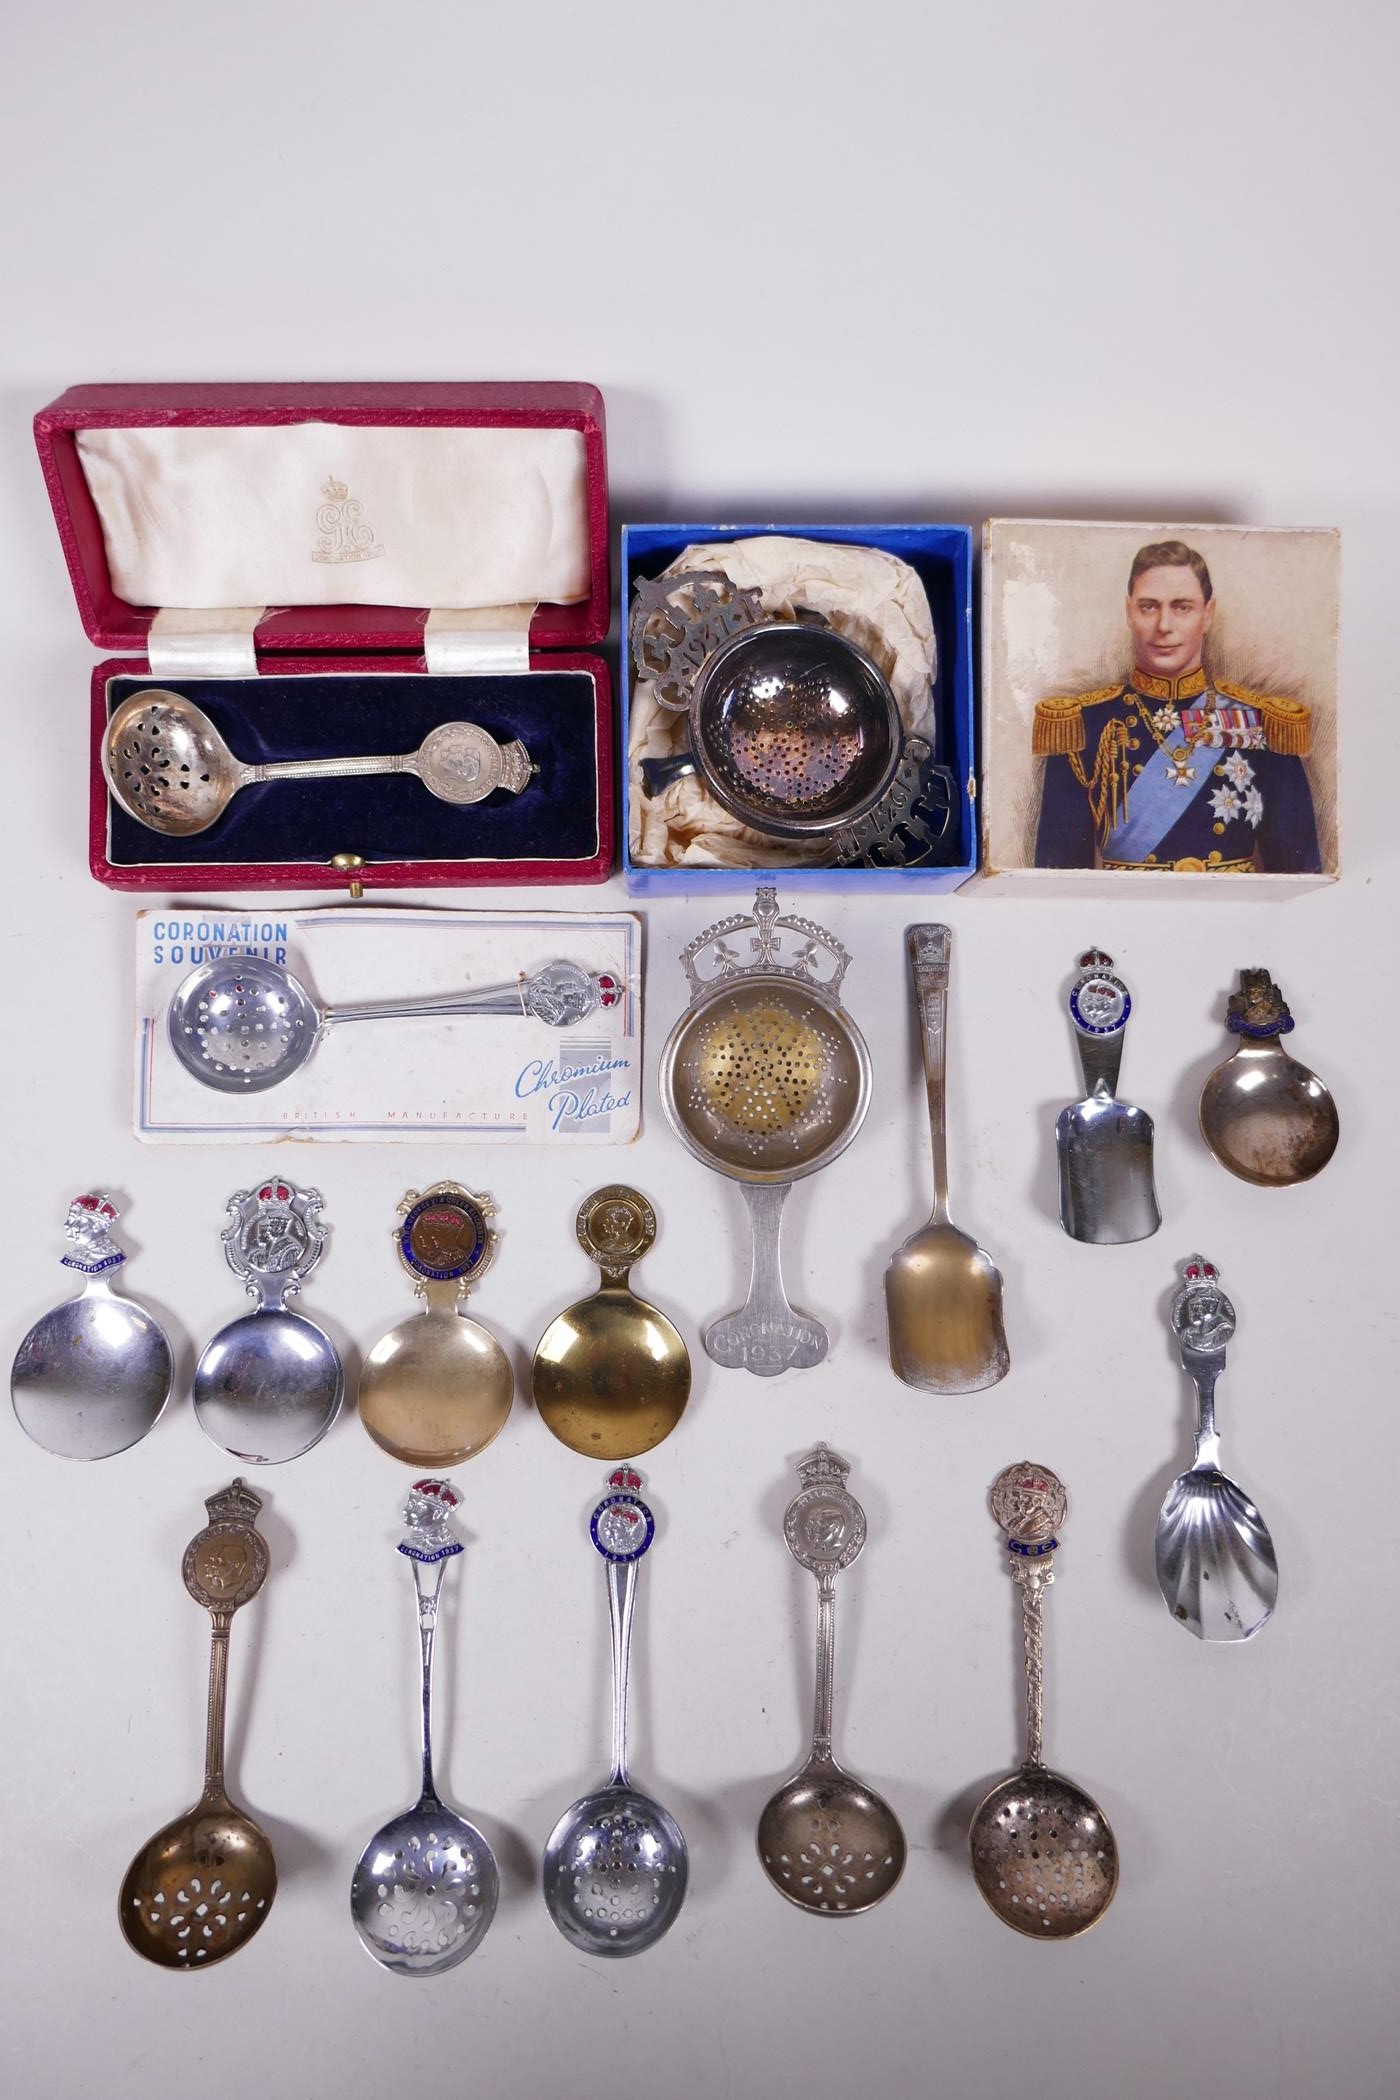 Eight commemorative 1937 coronation tea caddy spoons in silver plate, silver gilt or brass